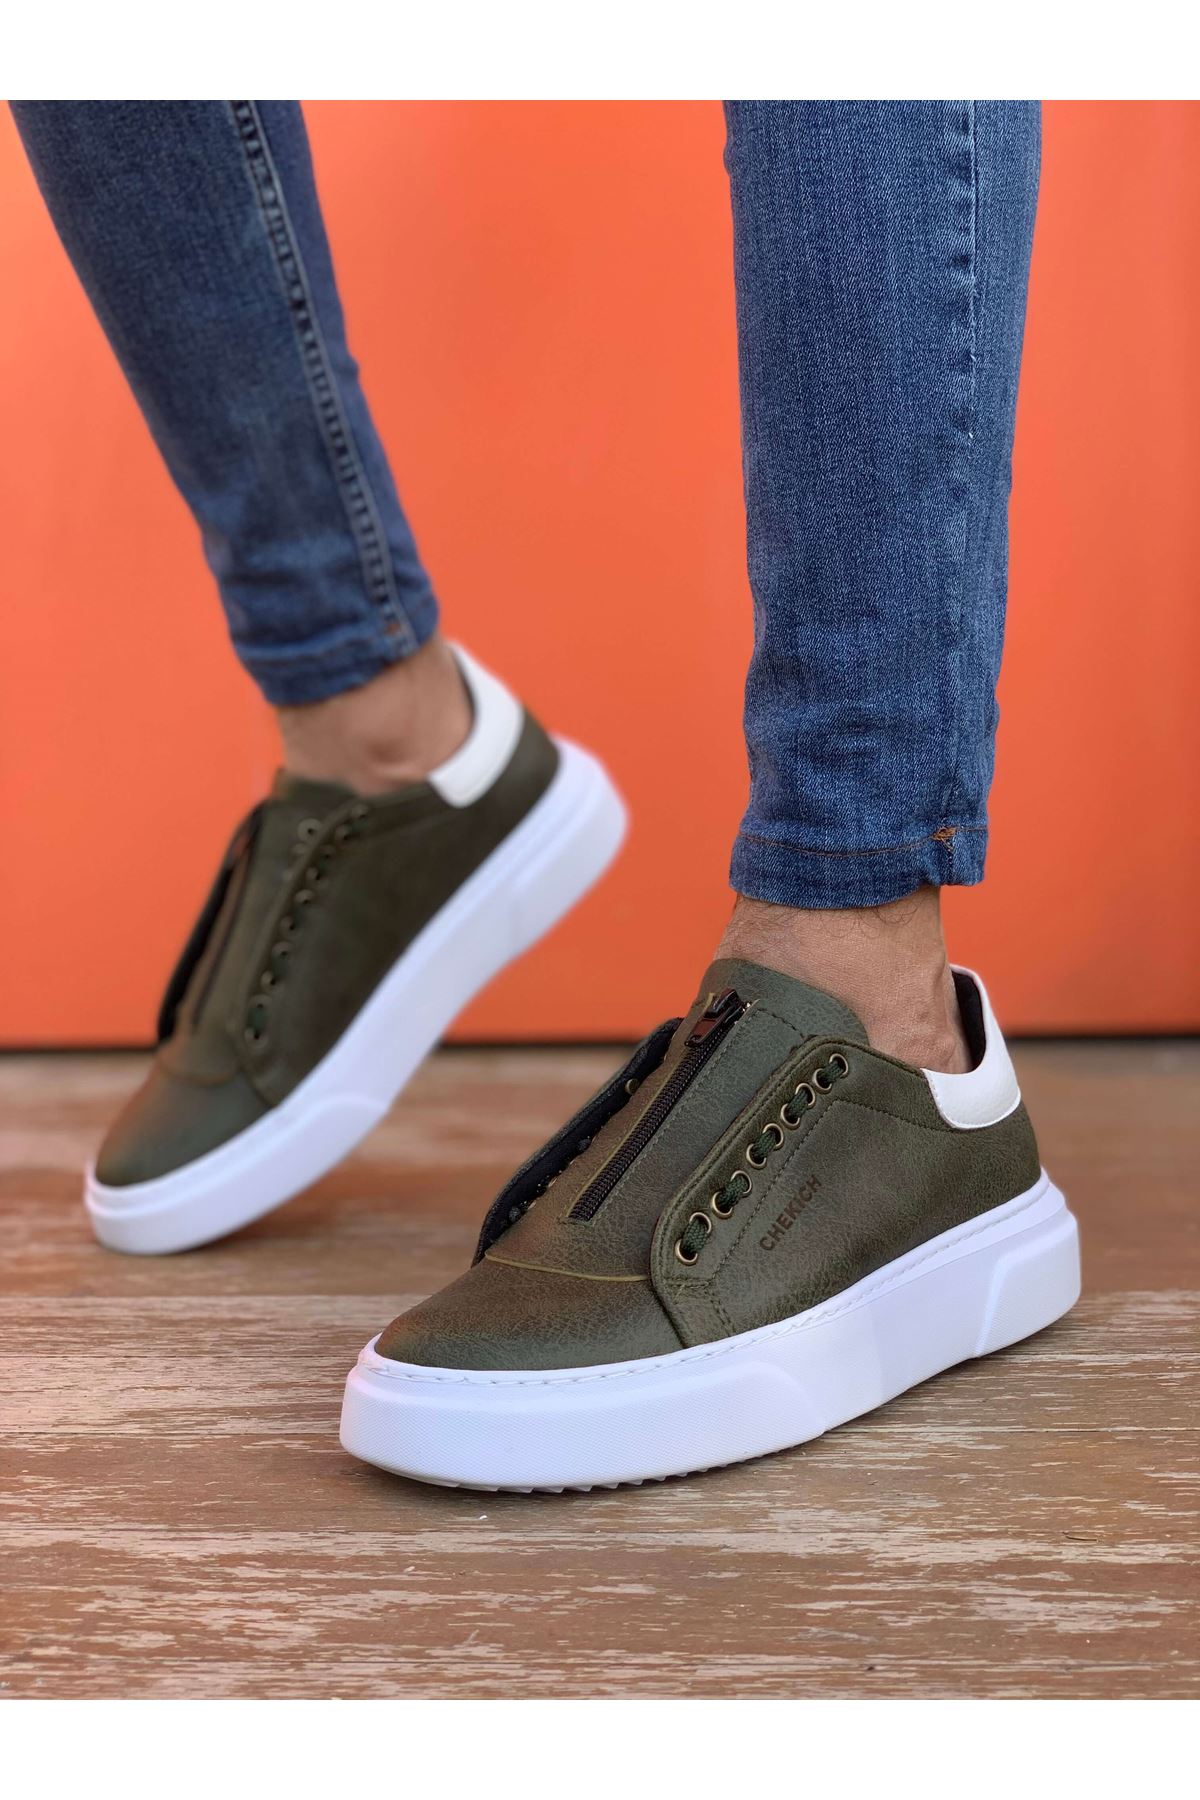 Chekich Men's Shoes Khaki and White Artificial Leather Zipper Closure Mixed Color Sneakers For Autumn Season Casual Sport Breathable Lightweight Green Vulcanized Material Sewing Sole Lace Details New Trend CH092 V7